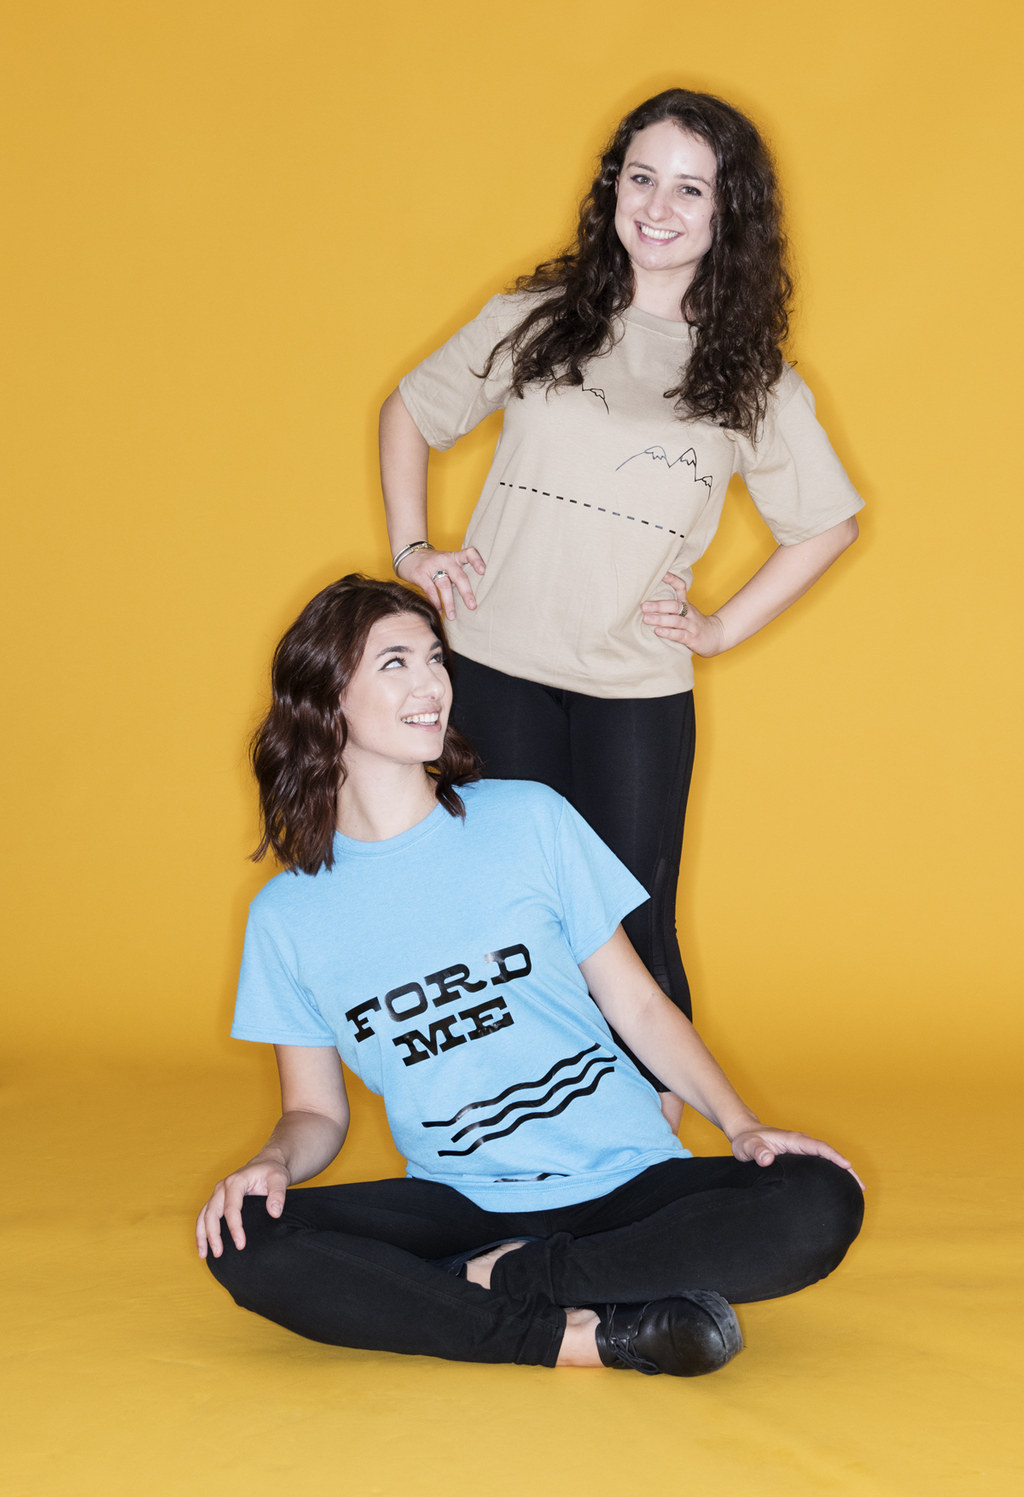 Seated woman wearing a &quot;Ford Me&quot; T-shirt next to a woman wearing a hilly T-shirt